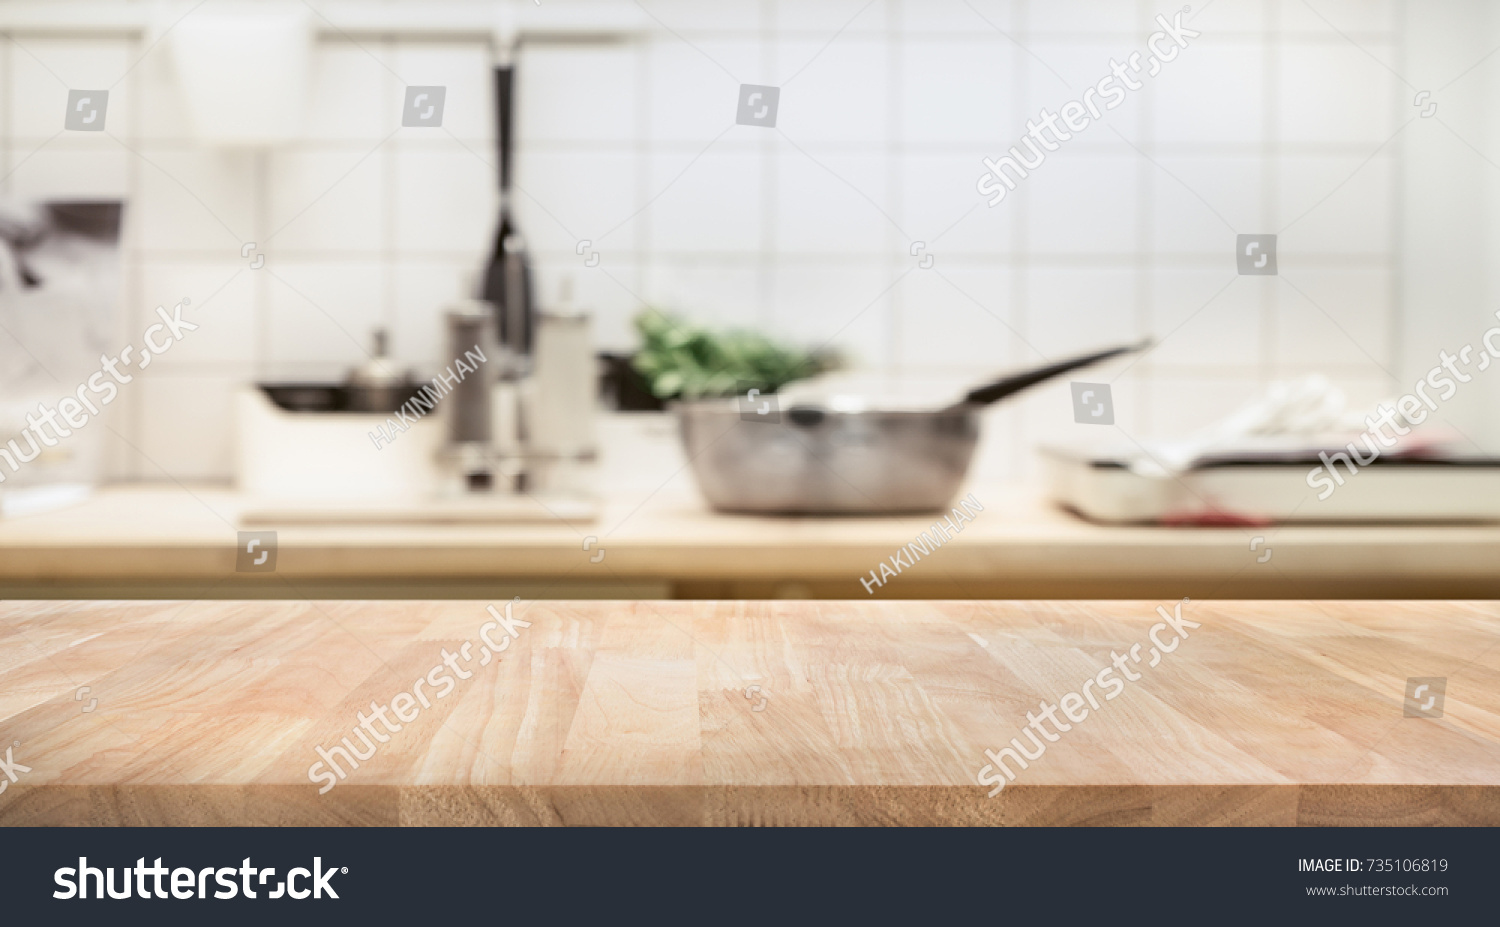 Wood table top on blur kitchen room background .For montage product display or design key visual layout. #735106819